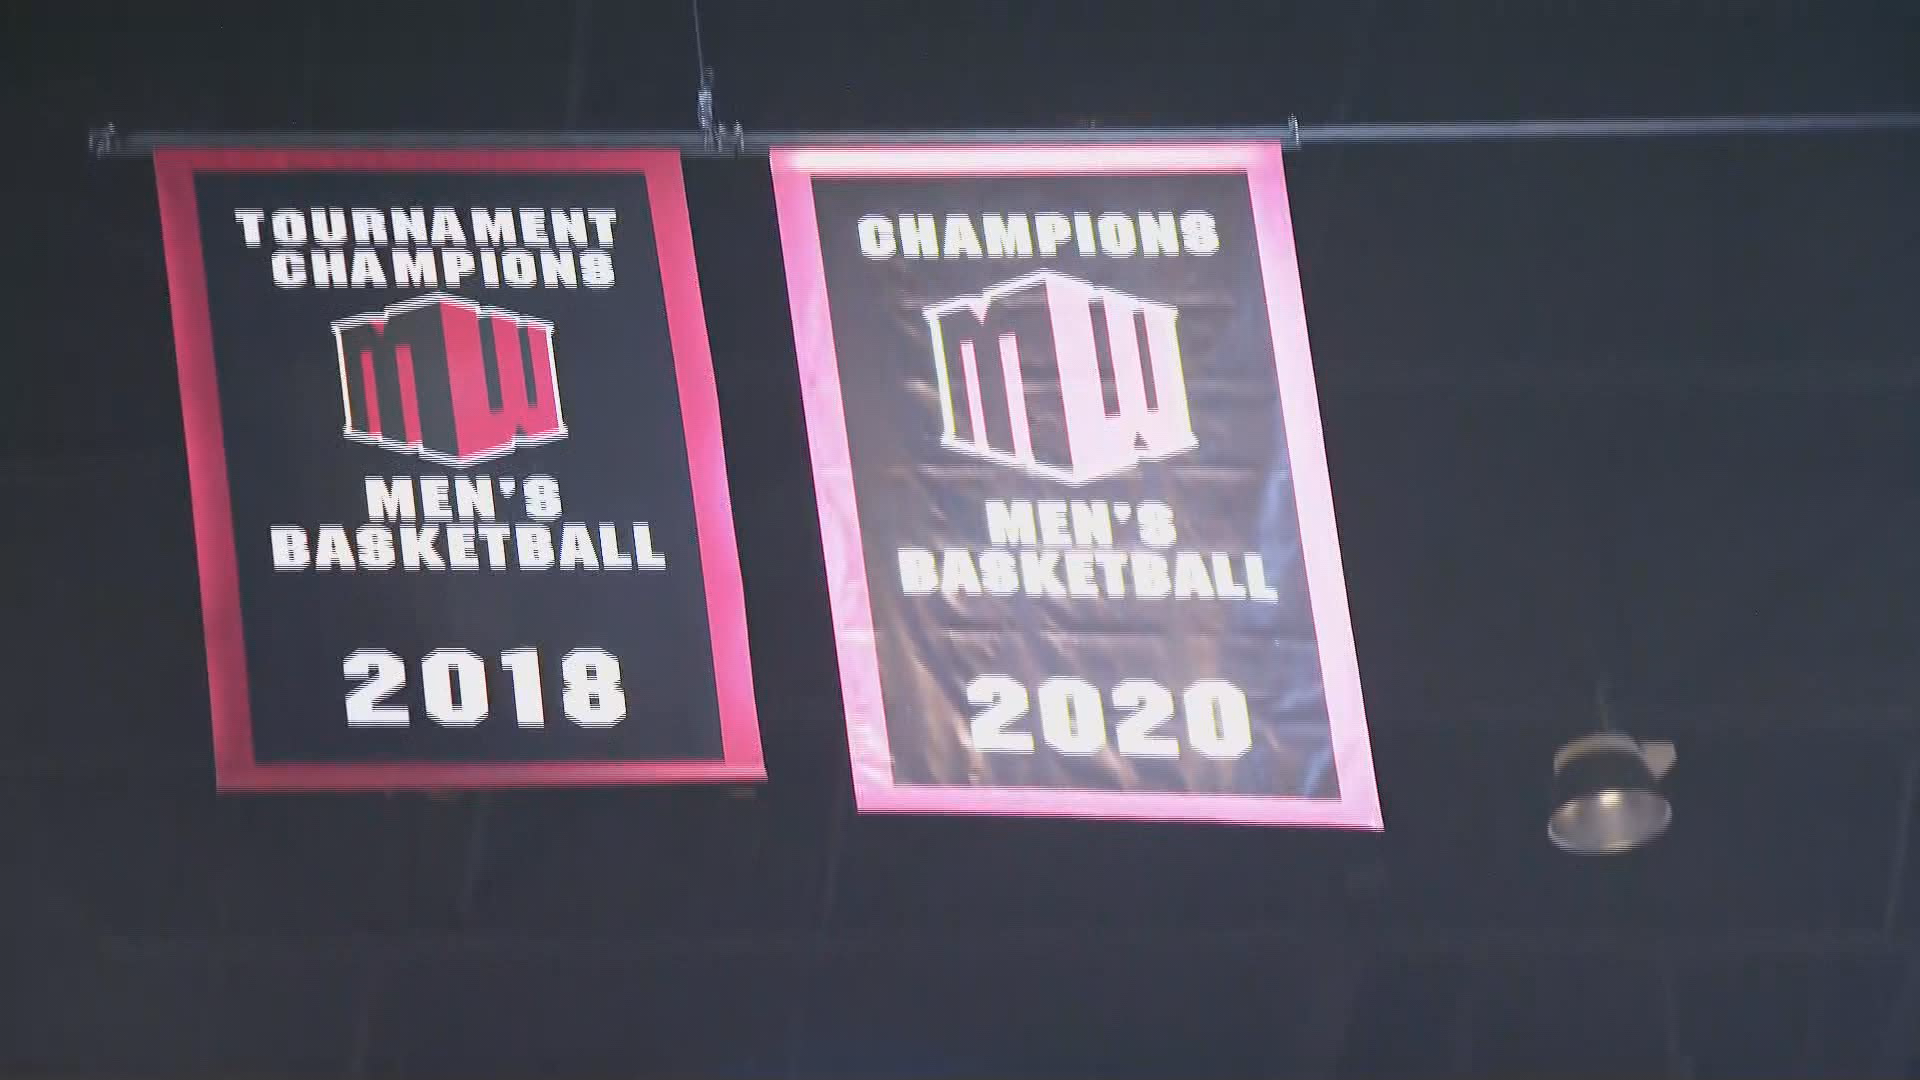 Typically, a conference championship banner is raised at the beginning of the next season, but the team wanted to honor the seniors.